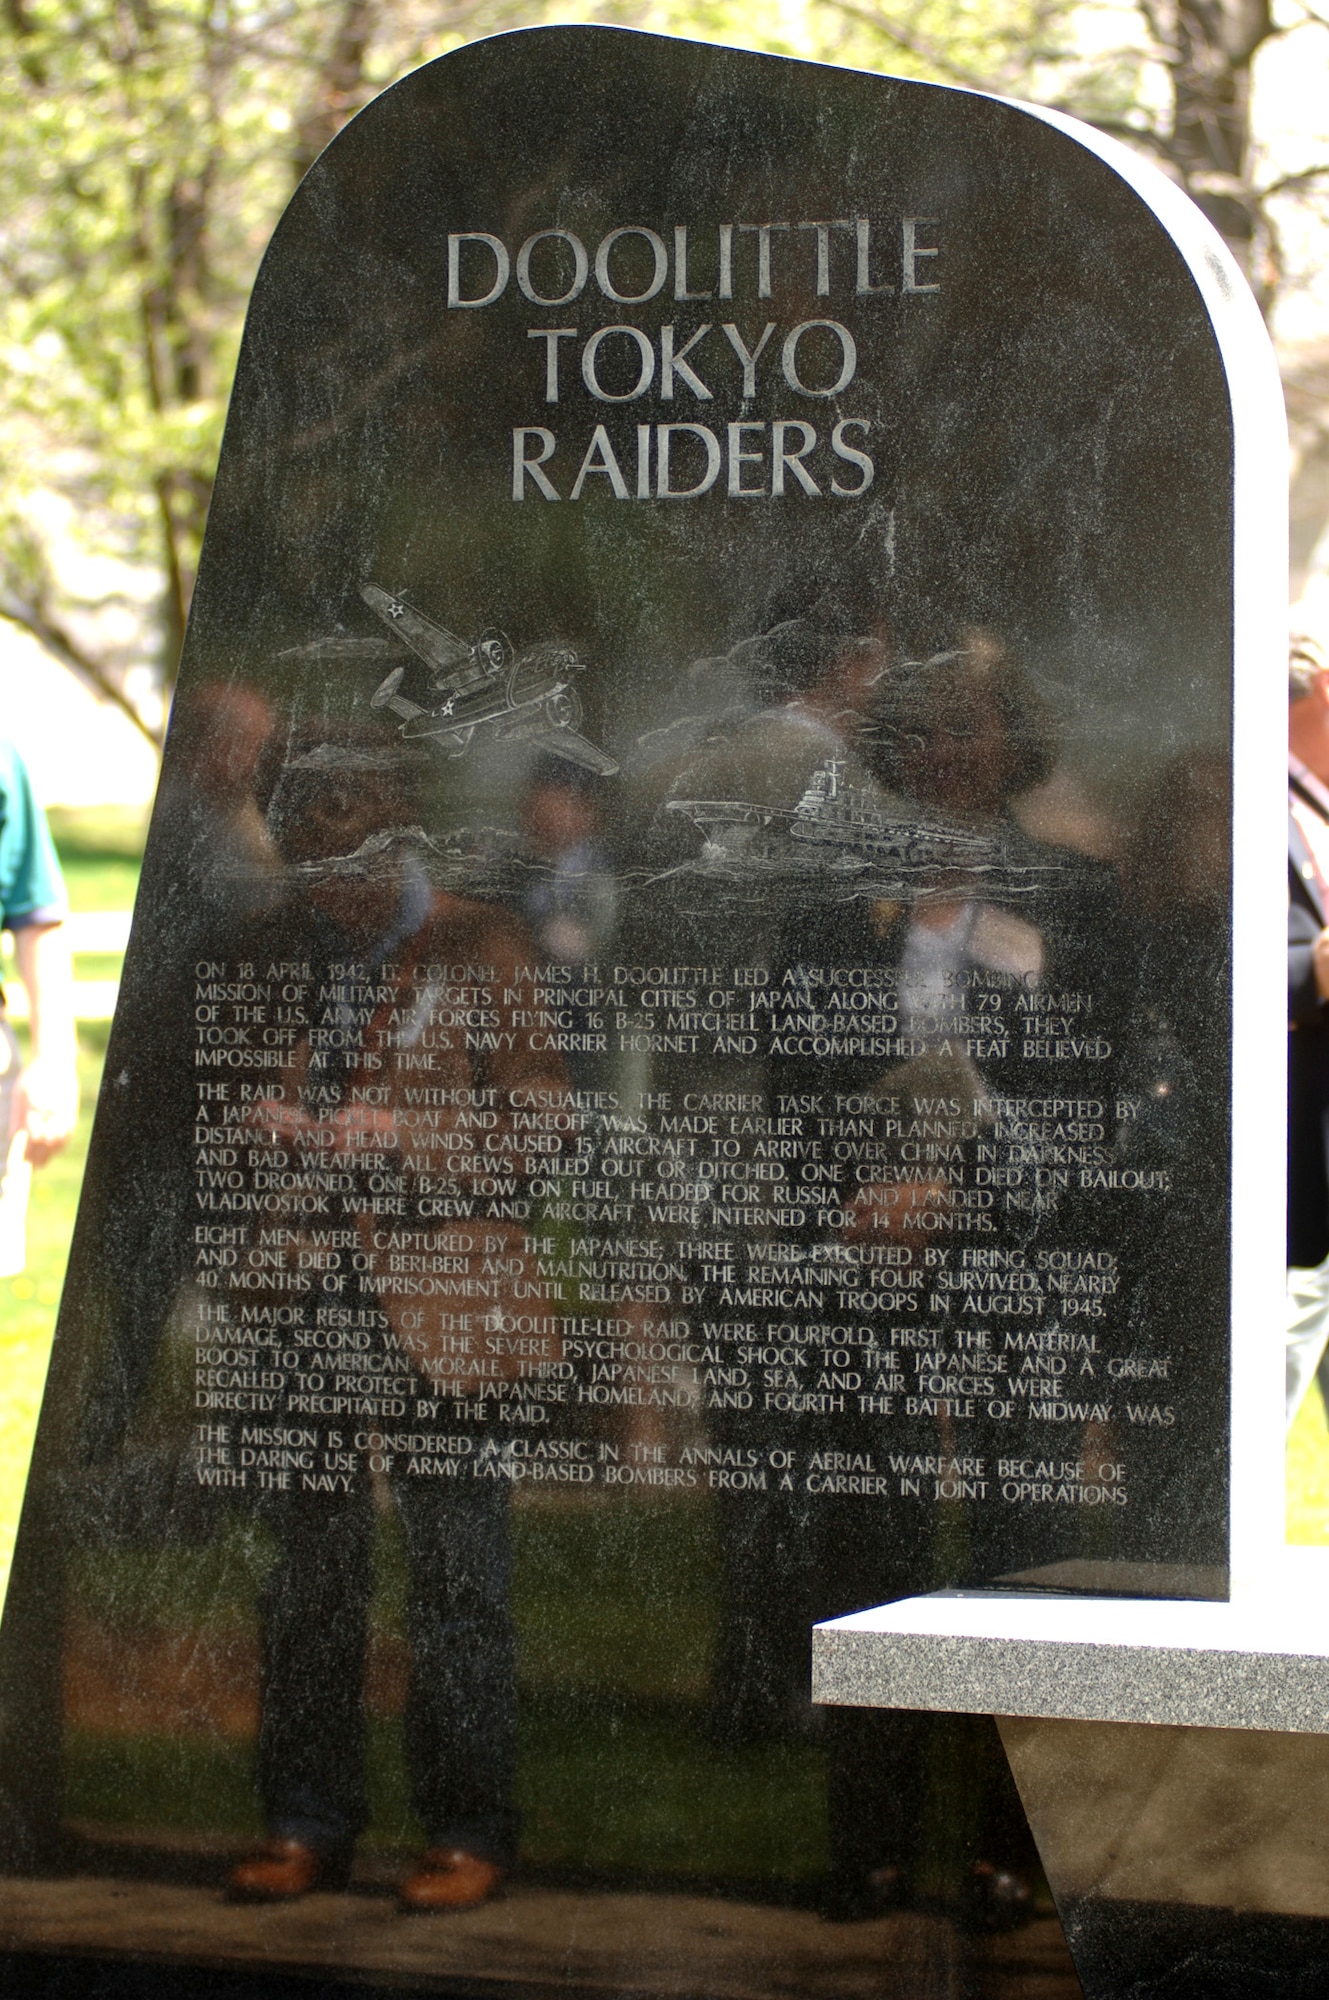 Friends and family of the Doolittle Raiders are reflected on a memorial marble tablet dedicated to the 80 men who flew with Lt. Col. James H. Doolittle on the successful Tokyo Raid of April 18, 1942. The Doolittle Raiders celebrated their 64th reunion in Dayton, Ohio, on Tuesday, April 18, 2006. (U.S. Air Force photo/Tech. Sgt. Cecilio M. Ricardo Jr.)